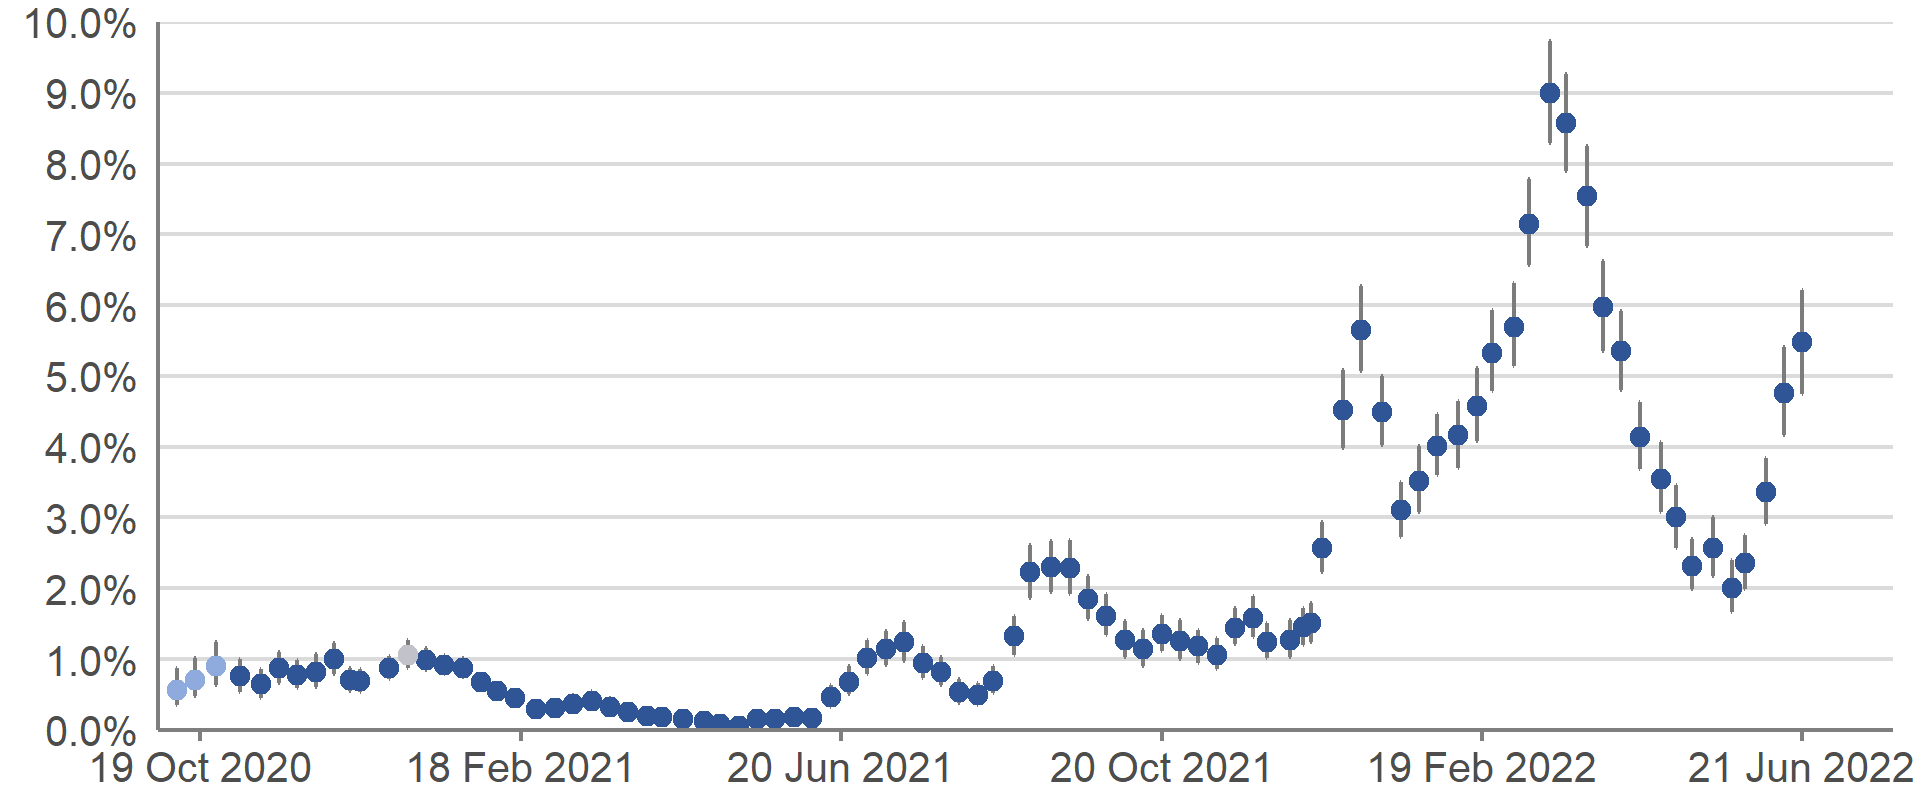 A scatter chart showing official weekly reported estimates of the percentage of the population in Scotland testing positive for COVID-19 between 3 October 2020 and 24 June 2022. Pale blue circles denote 14-day weighted estimates, dark blue circles denote official reported weekly estimates and whiskers show the 95% credible intervals. The estimates peaked in mid-March 2022 and then decreased until early-May. In recent weeks, the percentage of people testing positive for COVID-19 has increased.